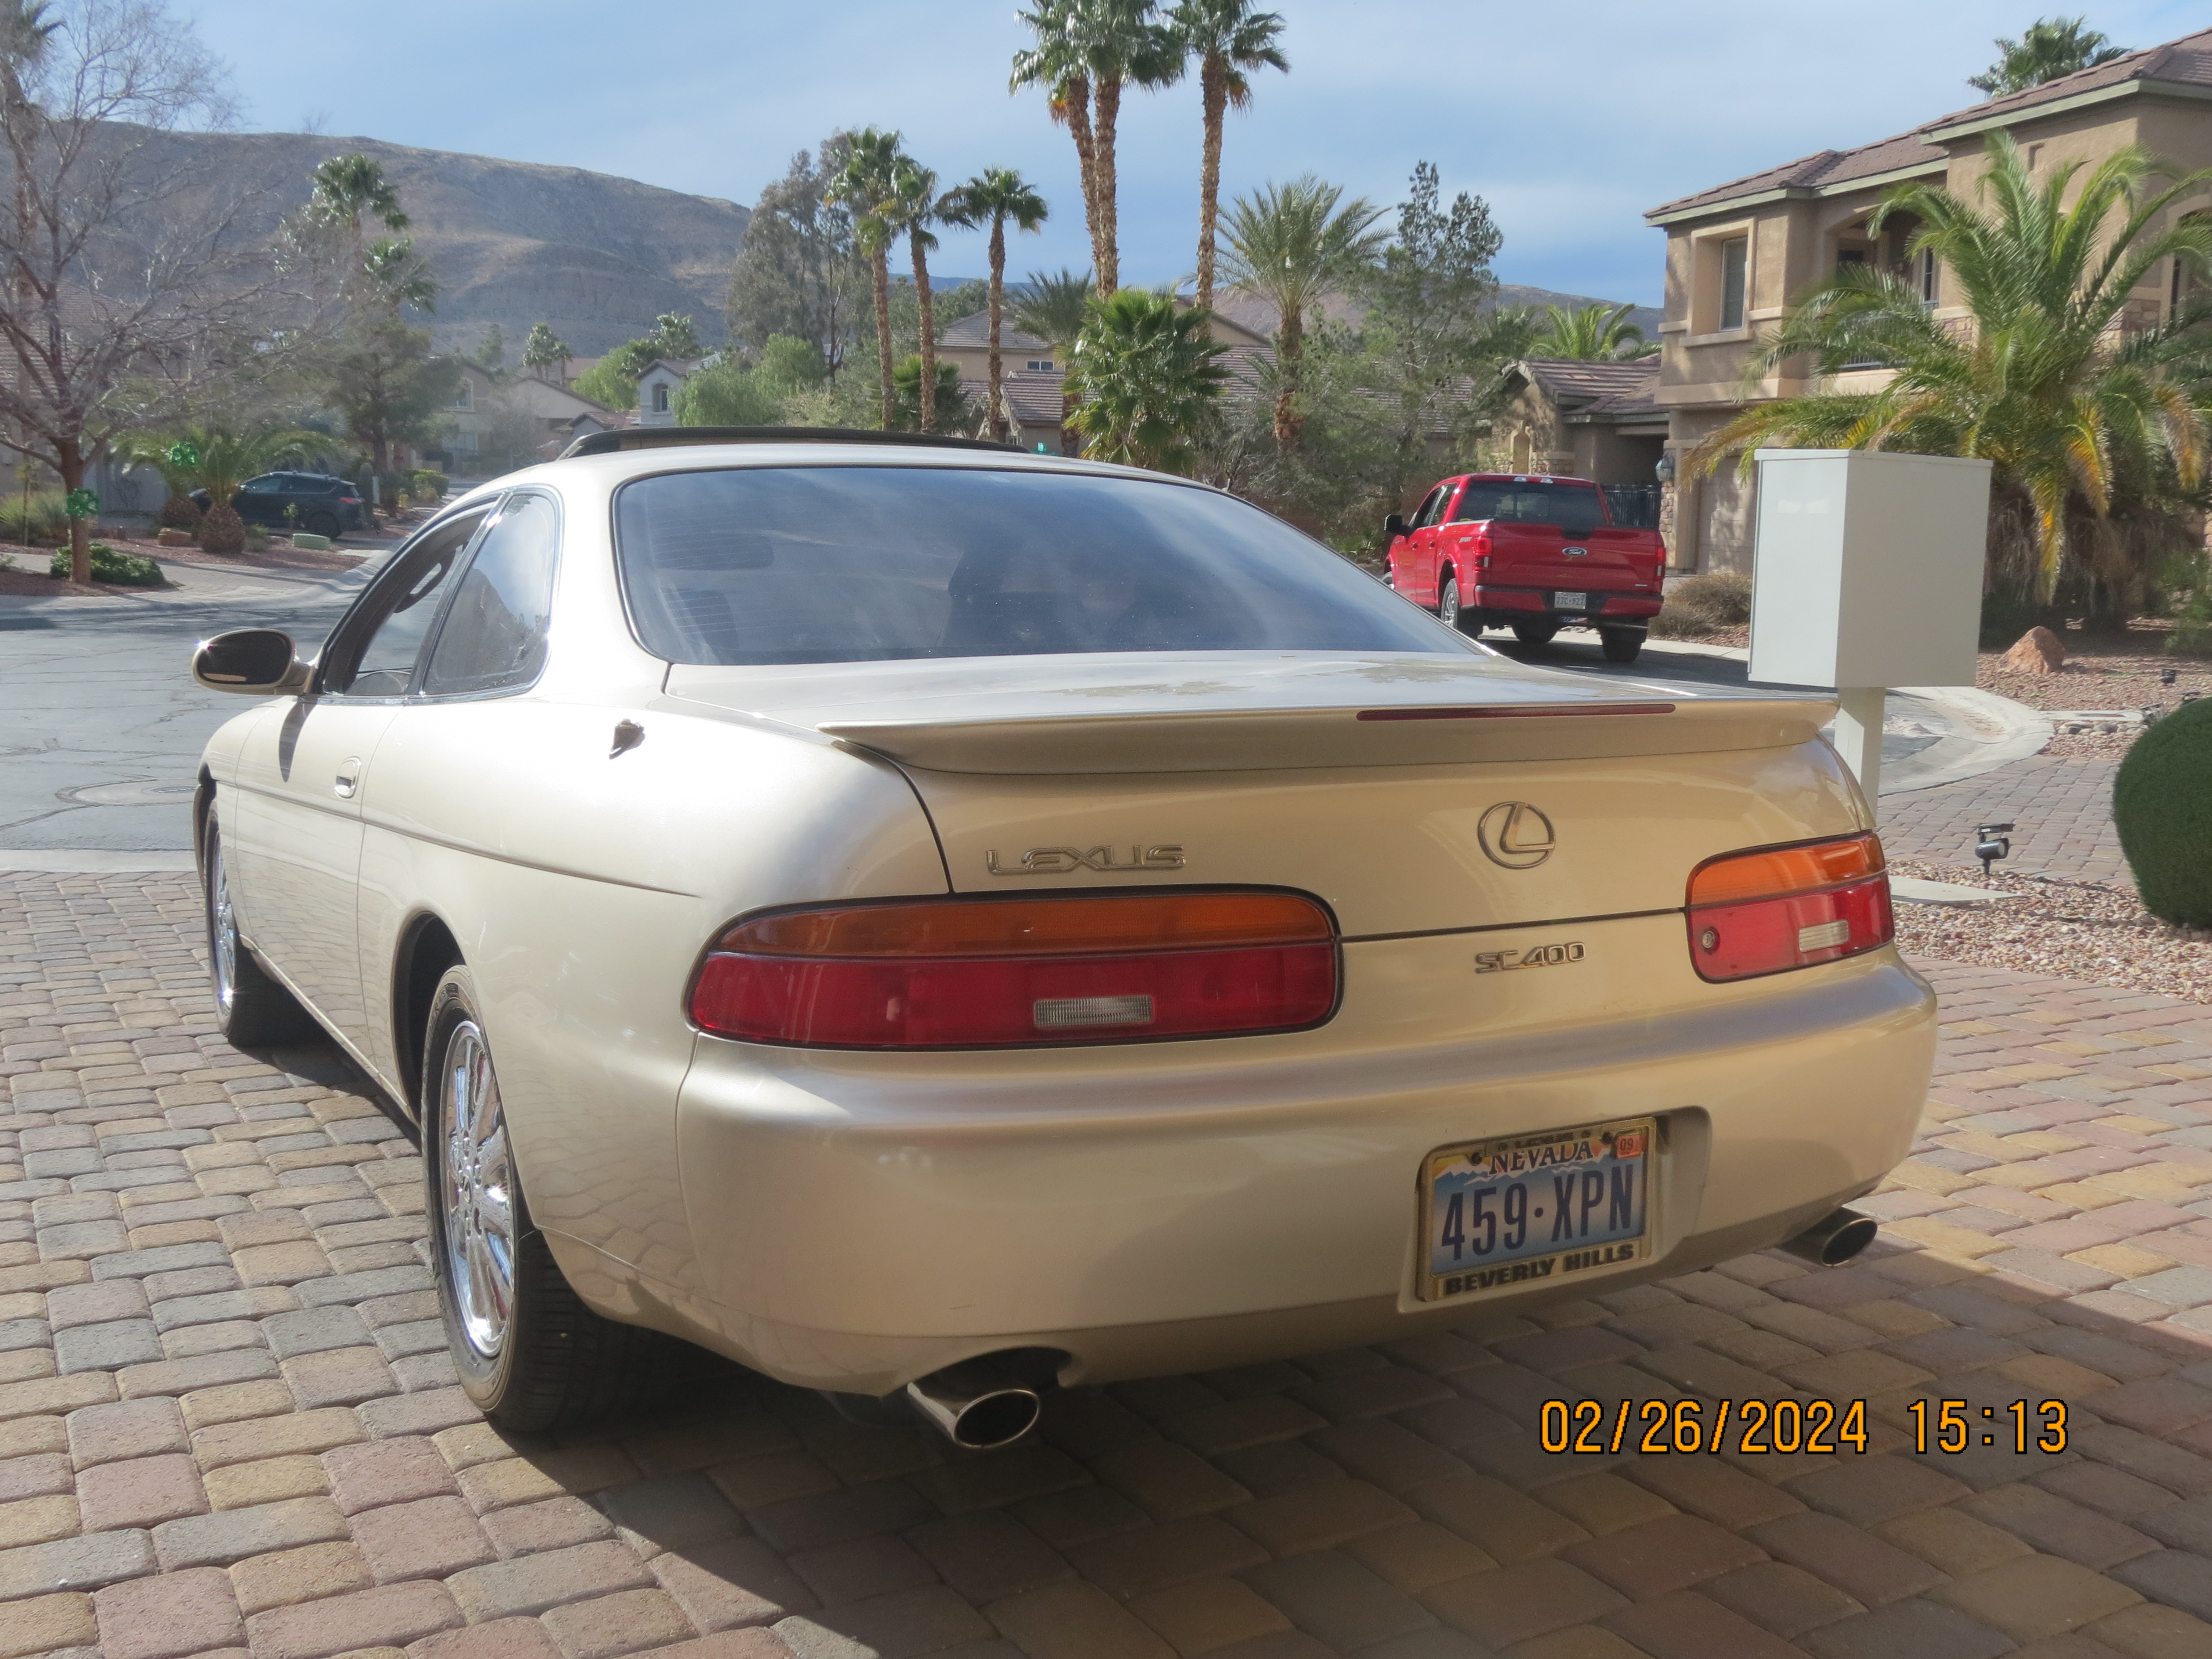 Used Lexus SC 400 for Sale Right Now - Autotrader